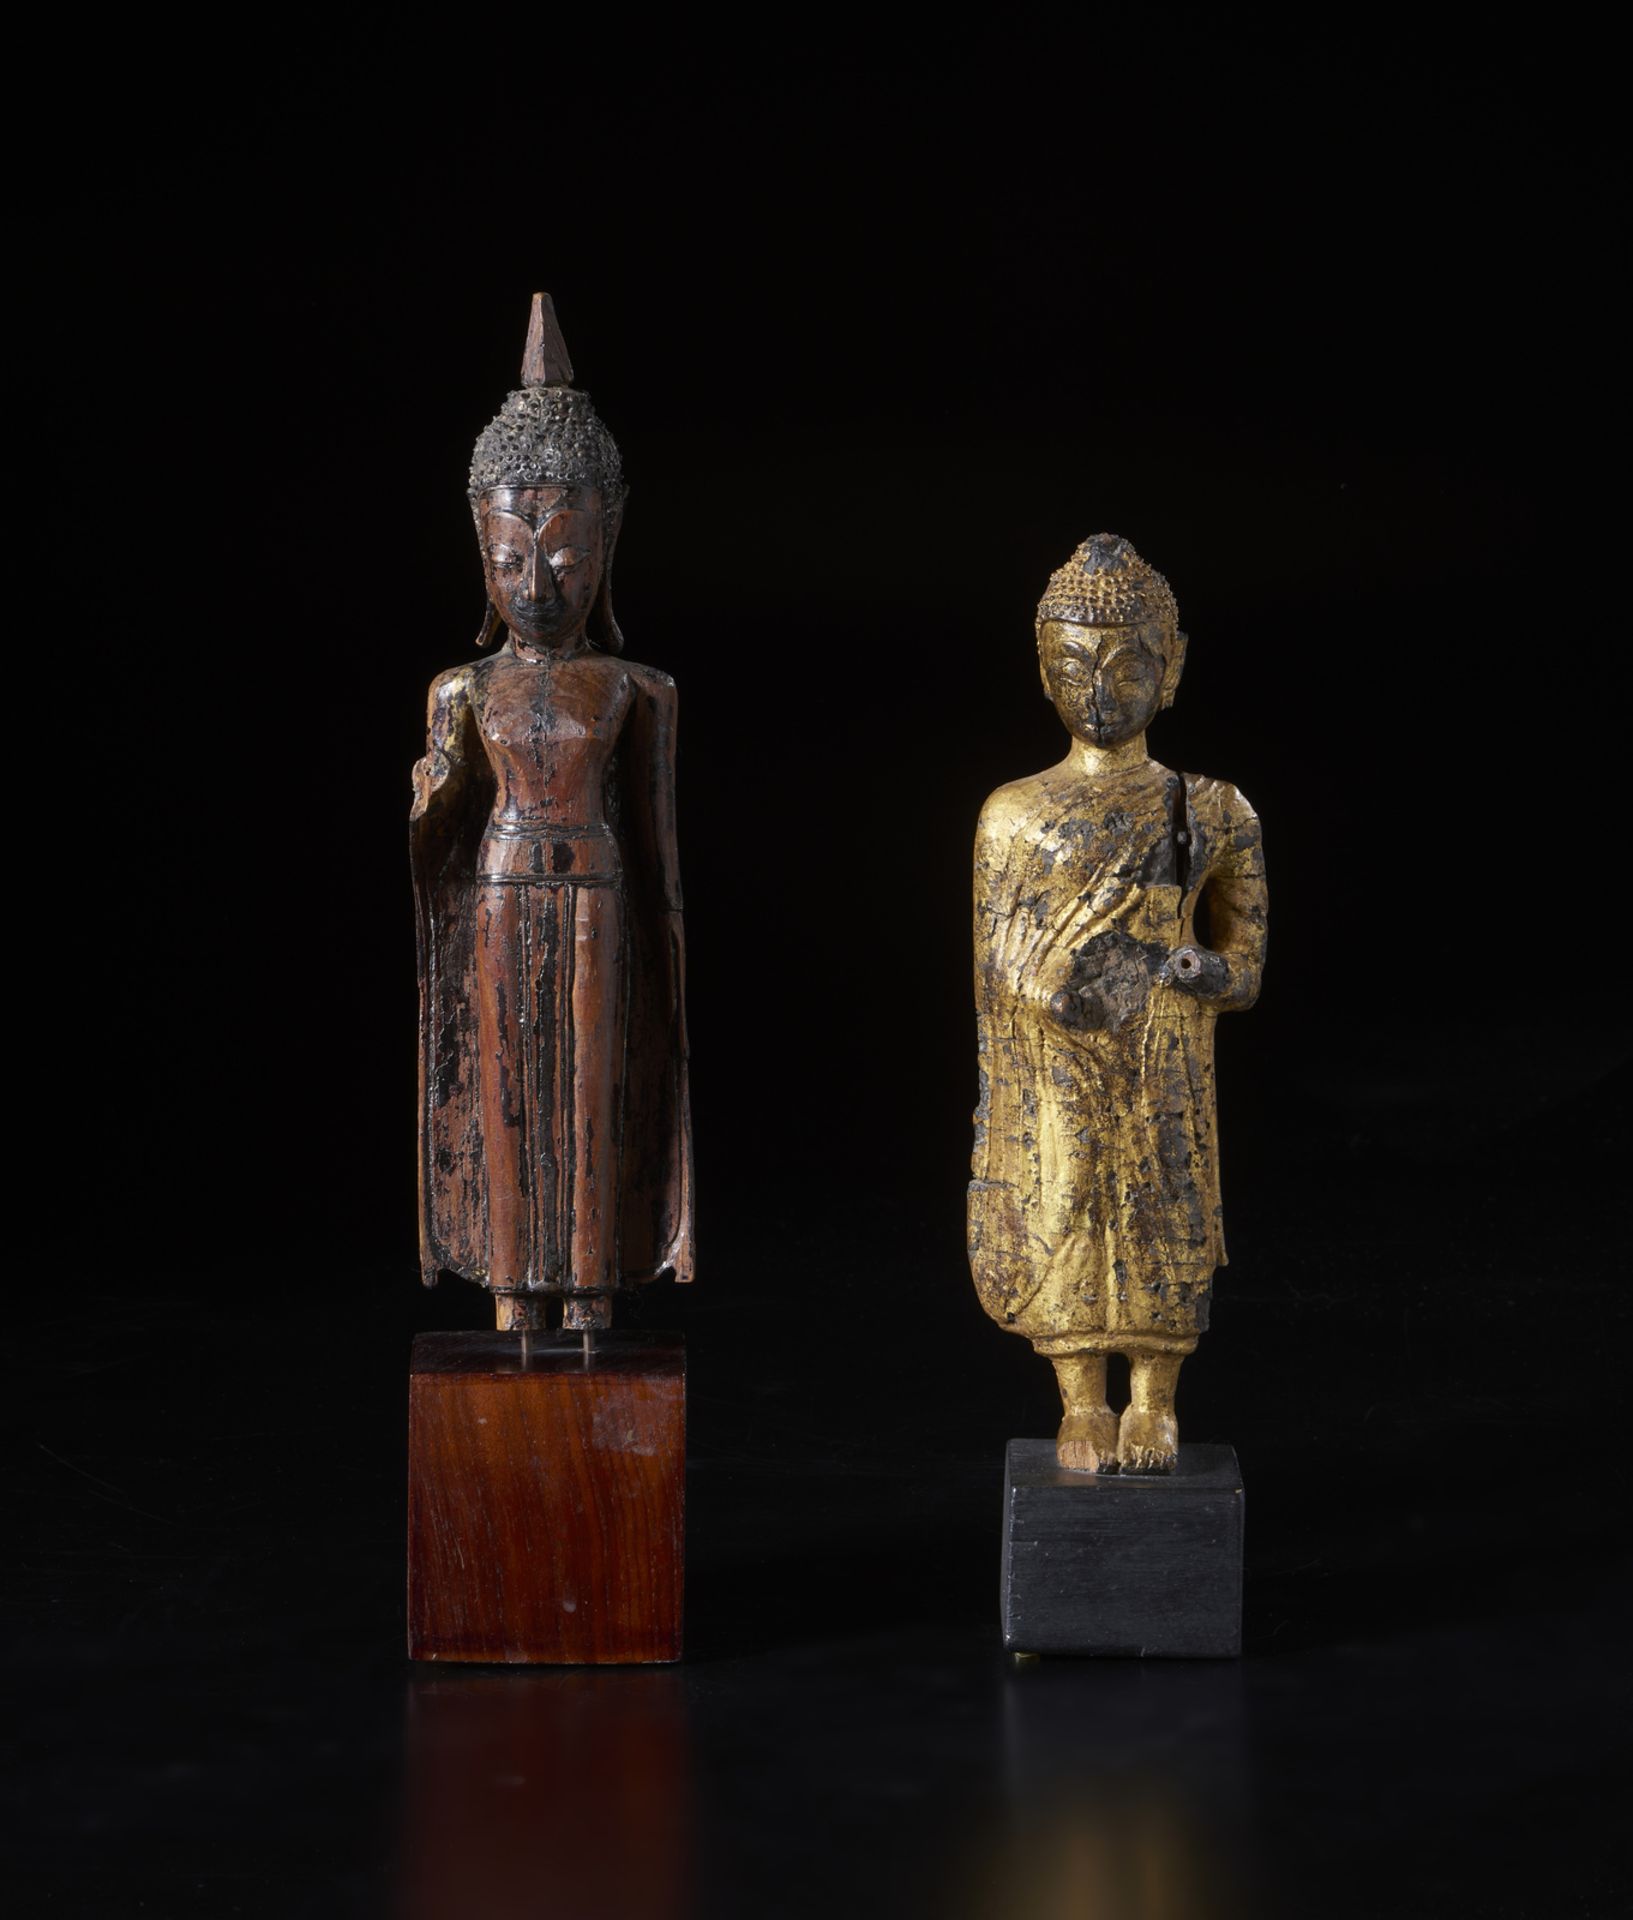 Two lacquered wooden sculptures depicting standing Buddha Burma, 18th-19th century Measurements: